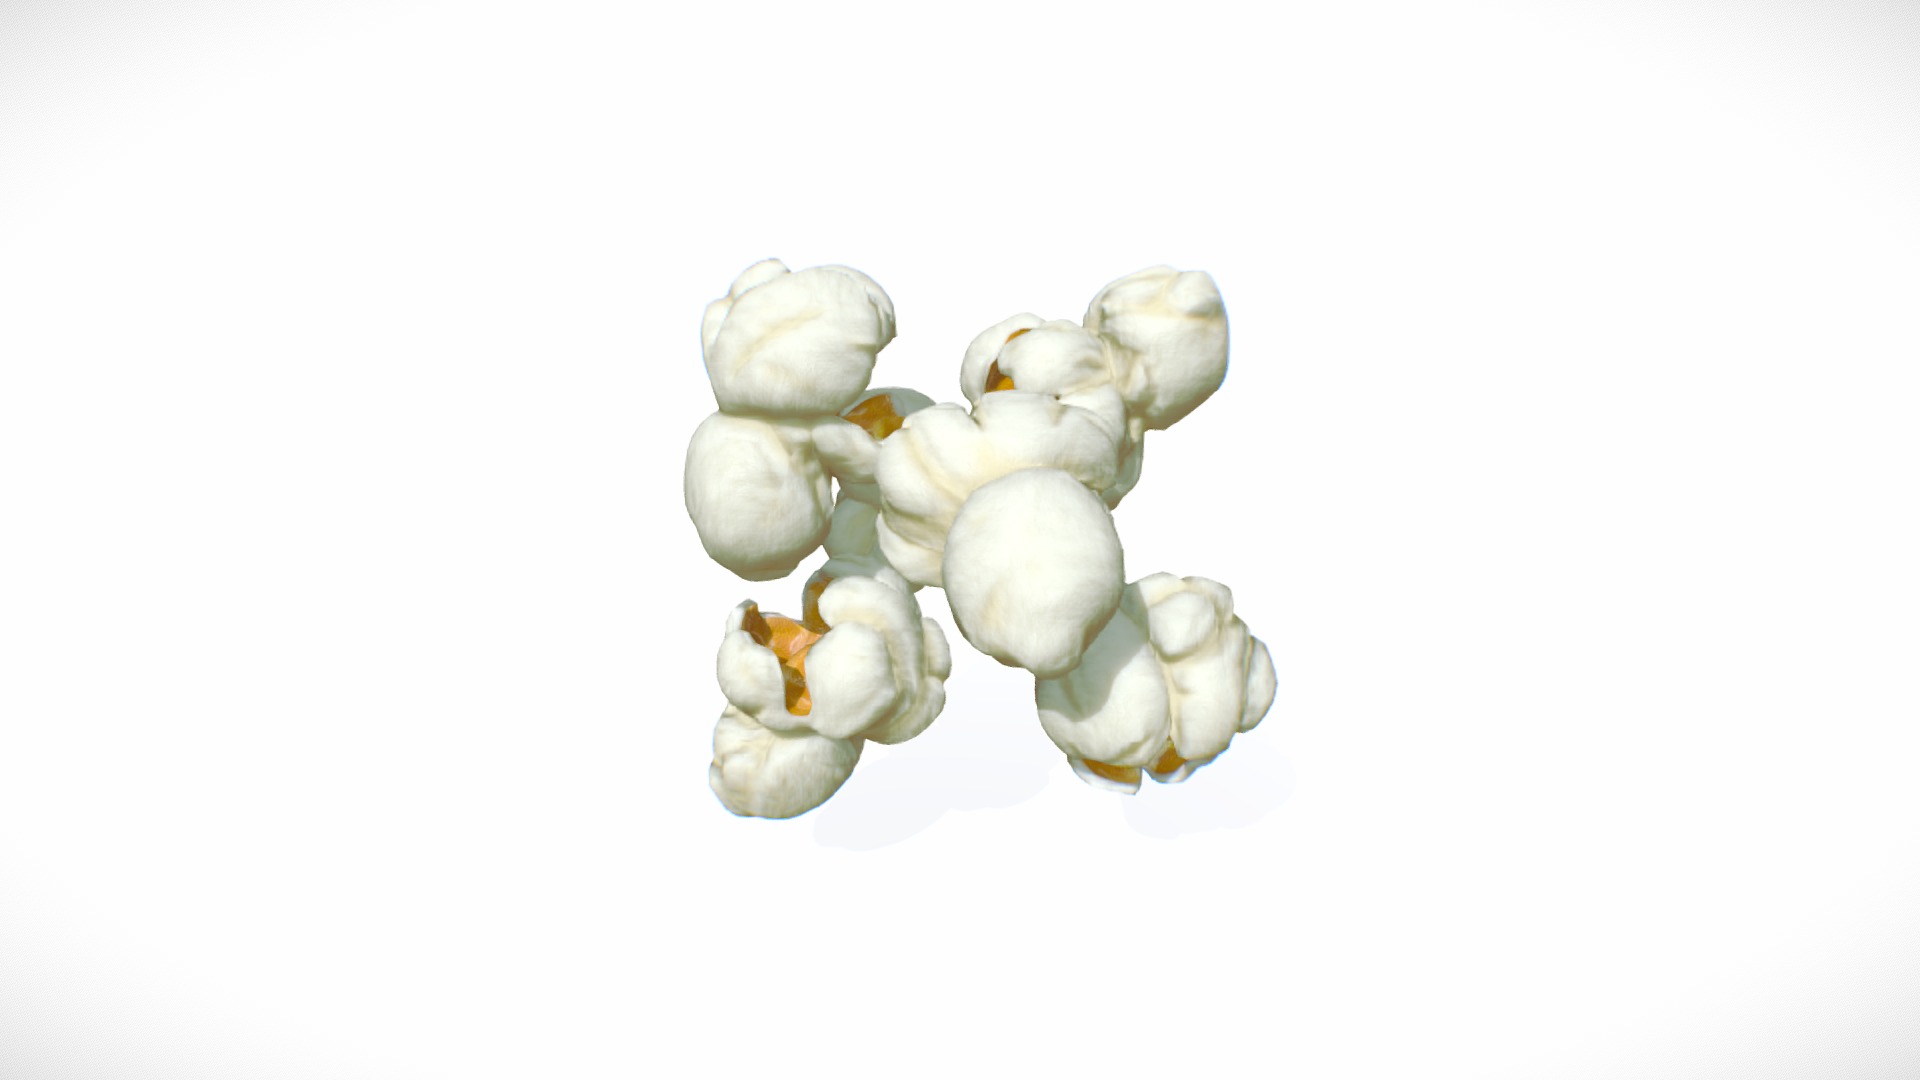 3D model Food Series #2 – Popcorn - This is a 3D model of the Food Series #2 - Popcorn. The 3D model is about a group of white flowers.